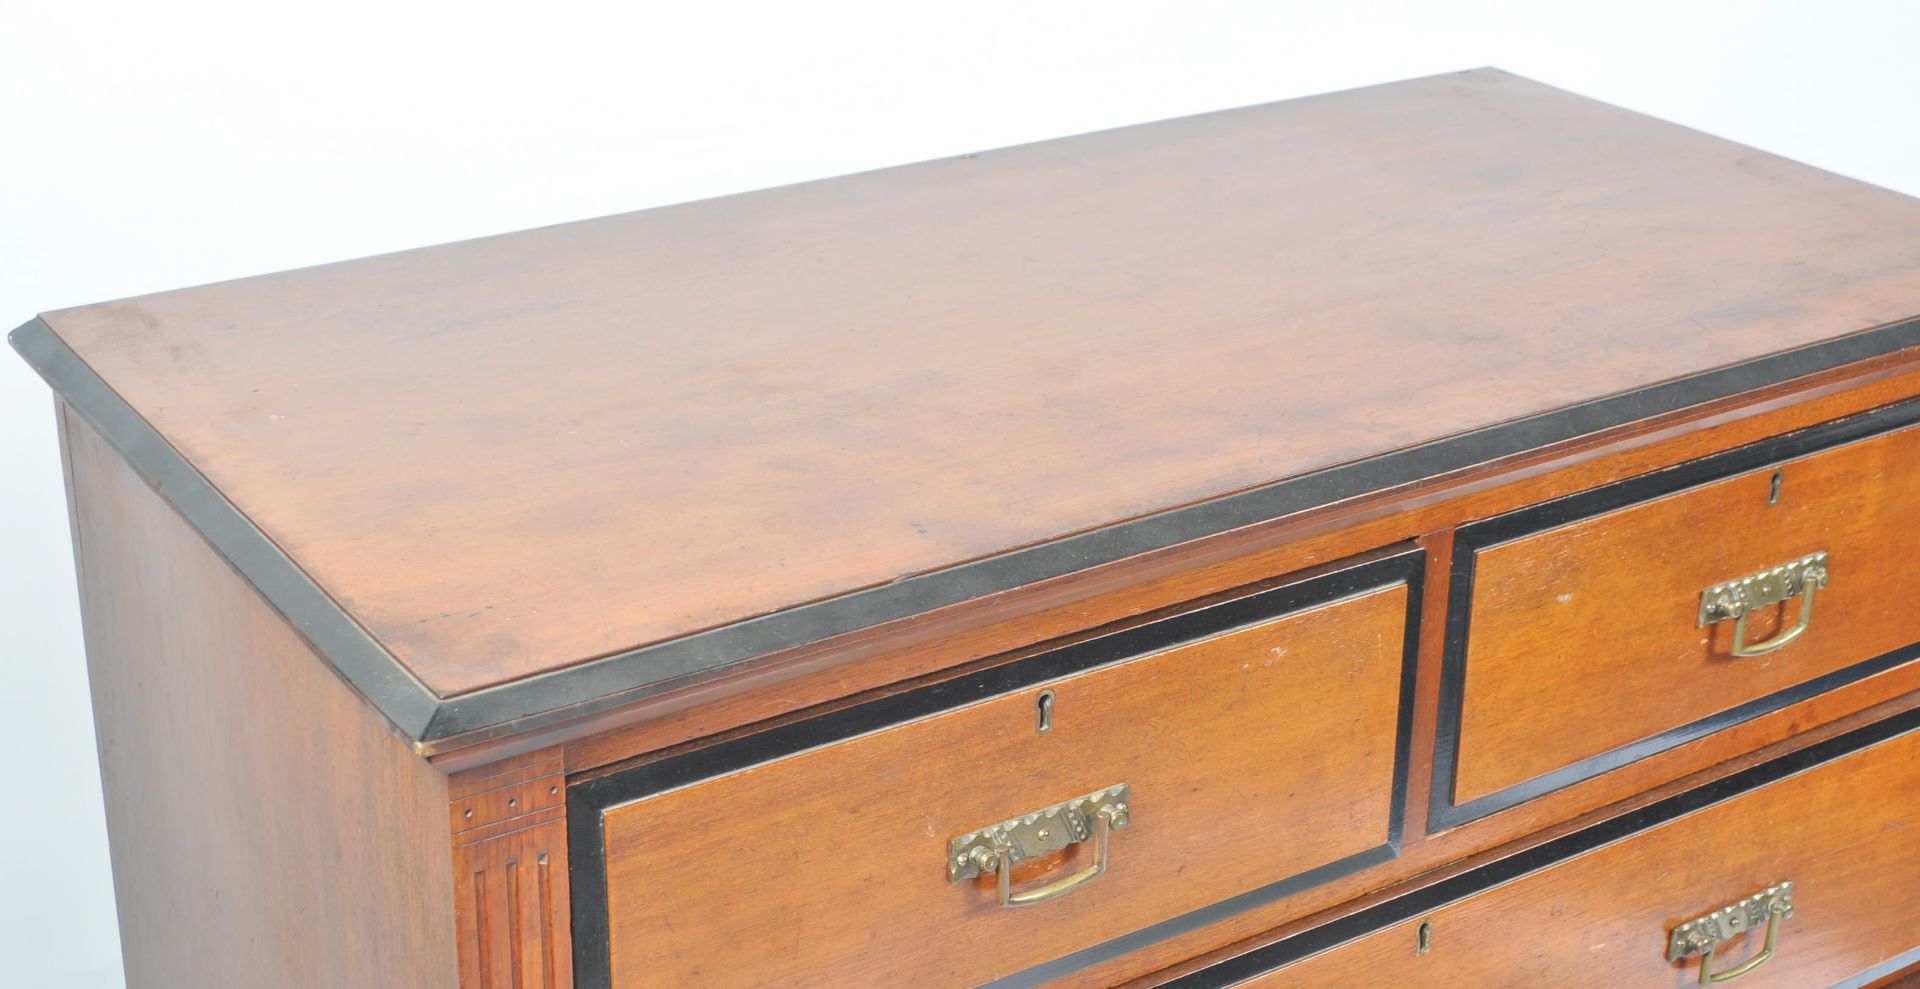 MAPLE & CO LONDON 19TH CENTURY MAHOGANY CHEST OF DRAWERS - Image 3 of 5